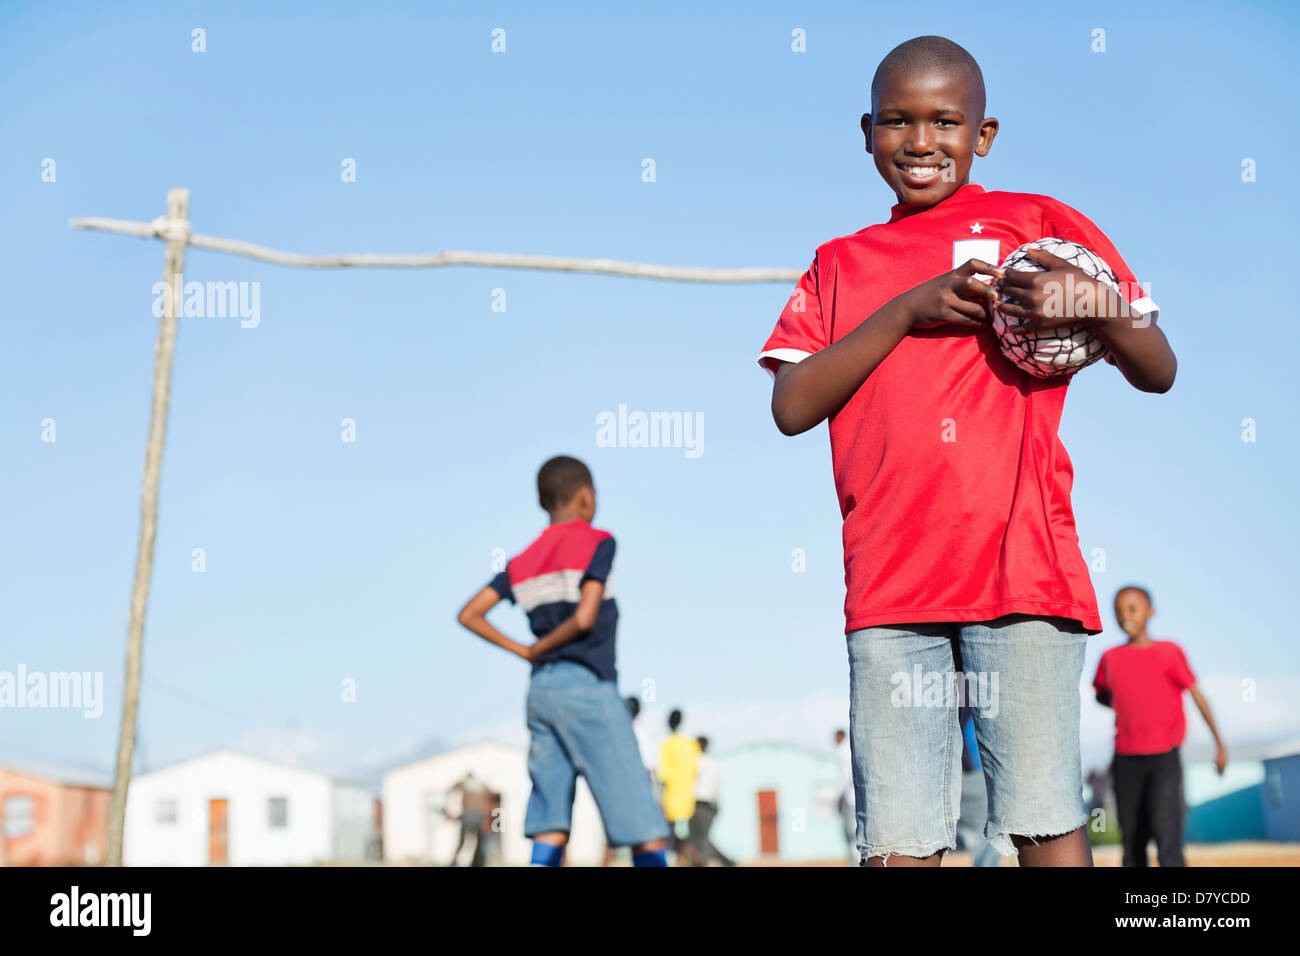 Boy holding soccer ball in dirt field Banque D'Images